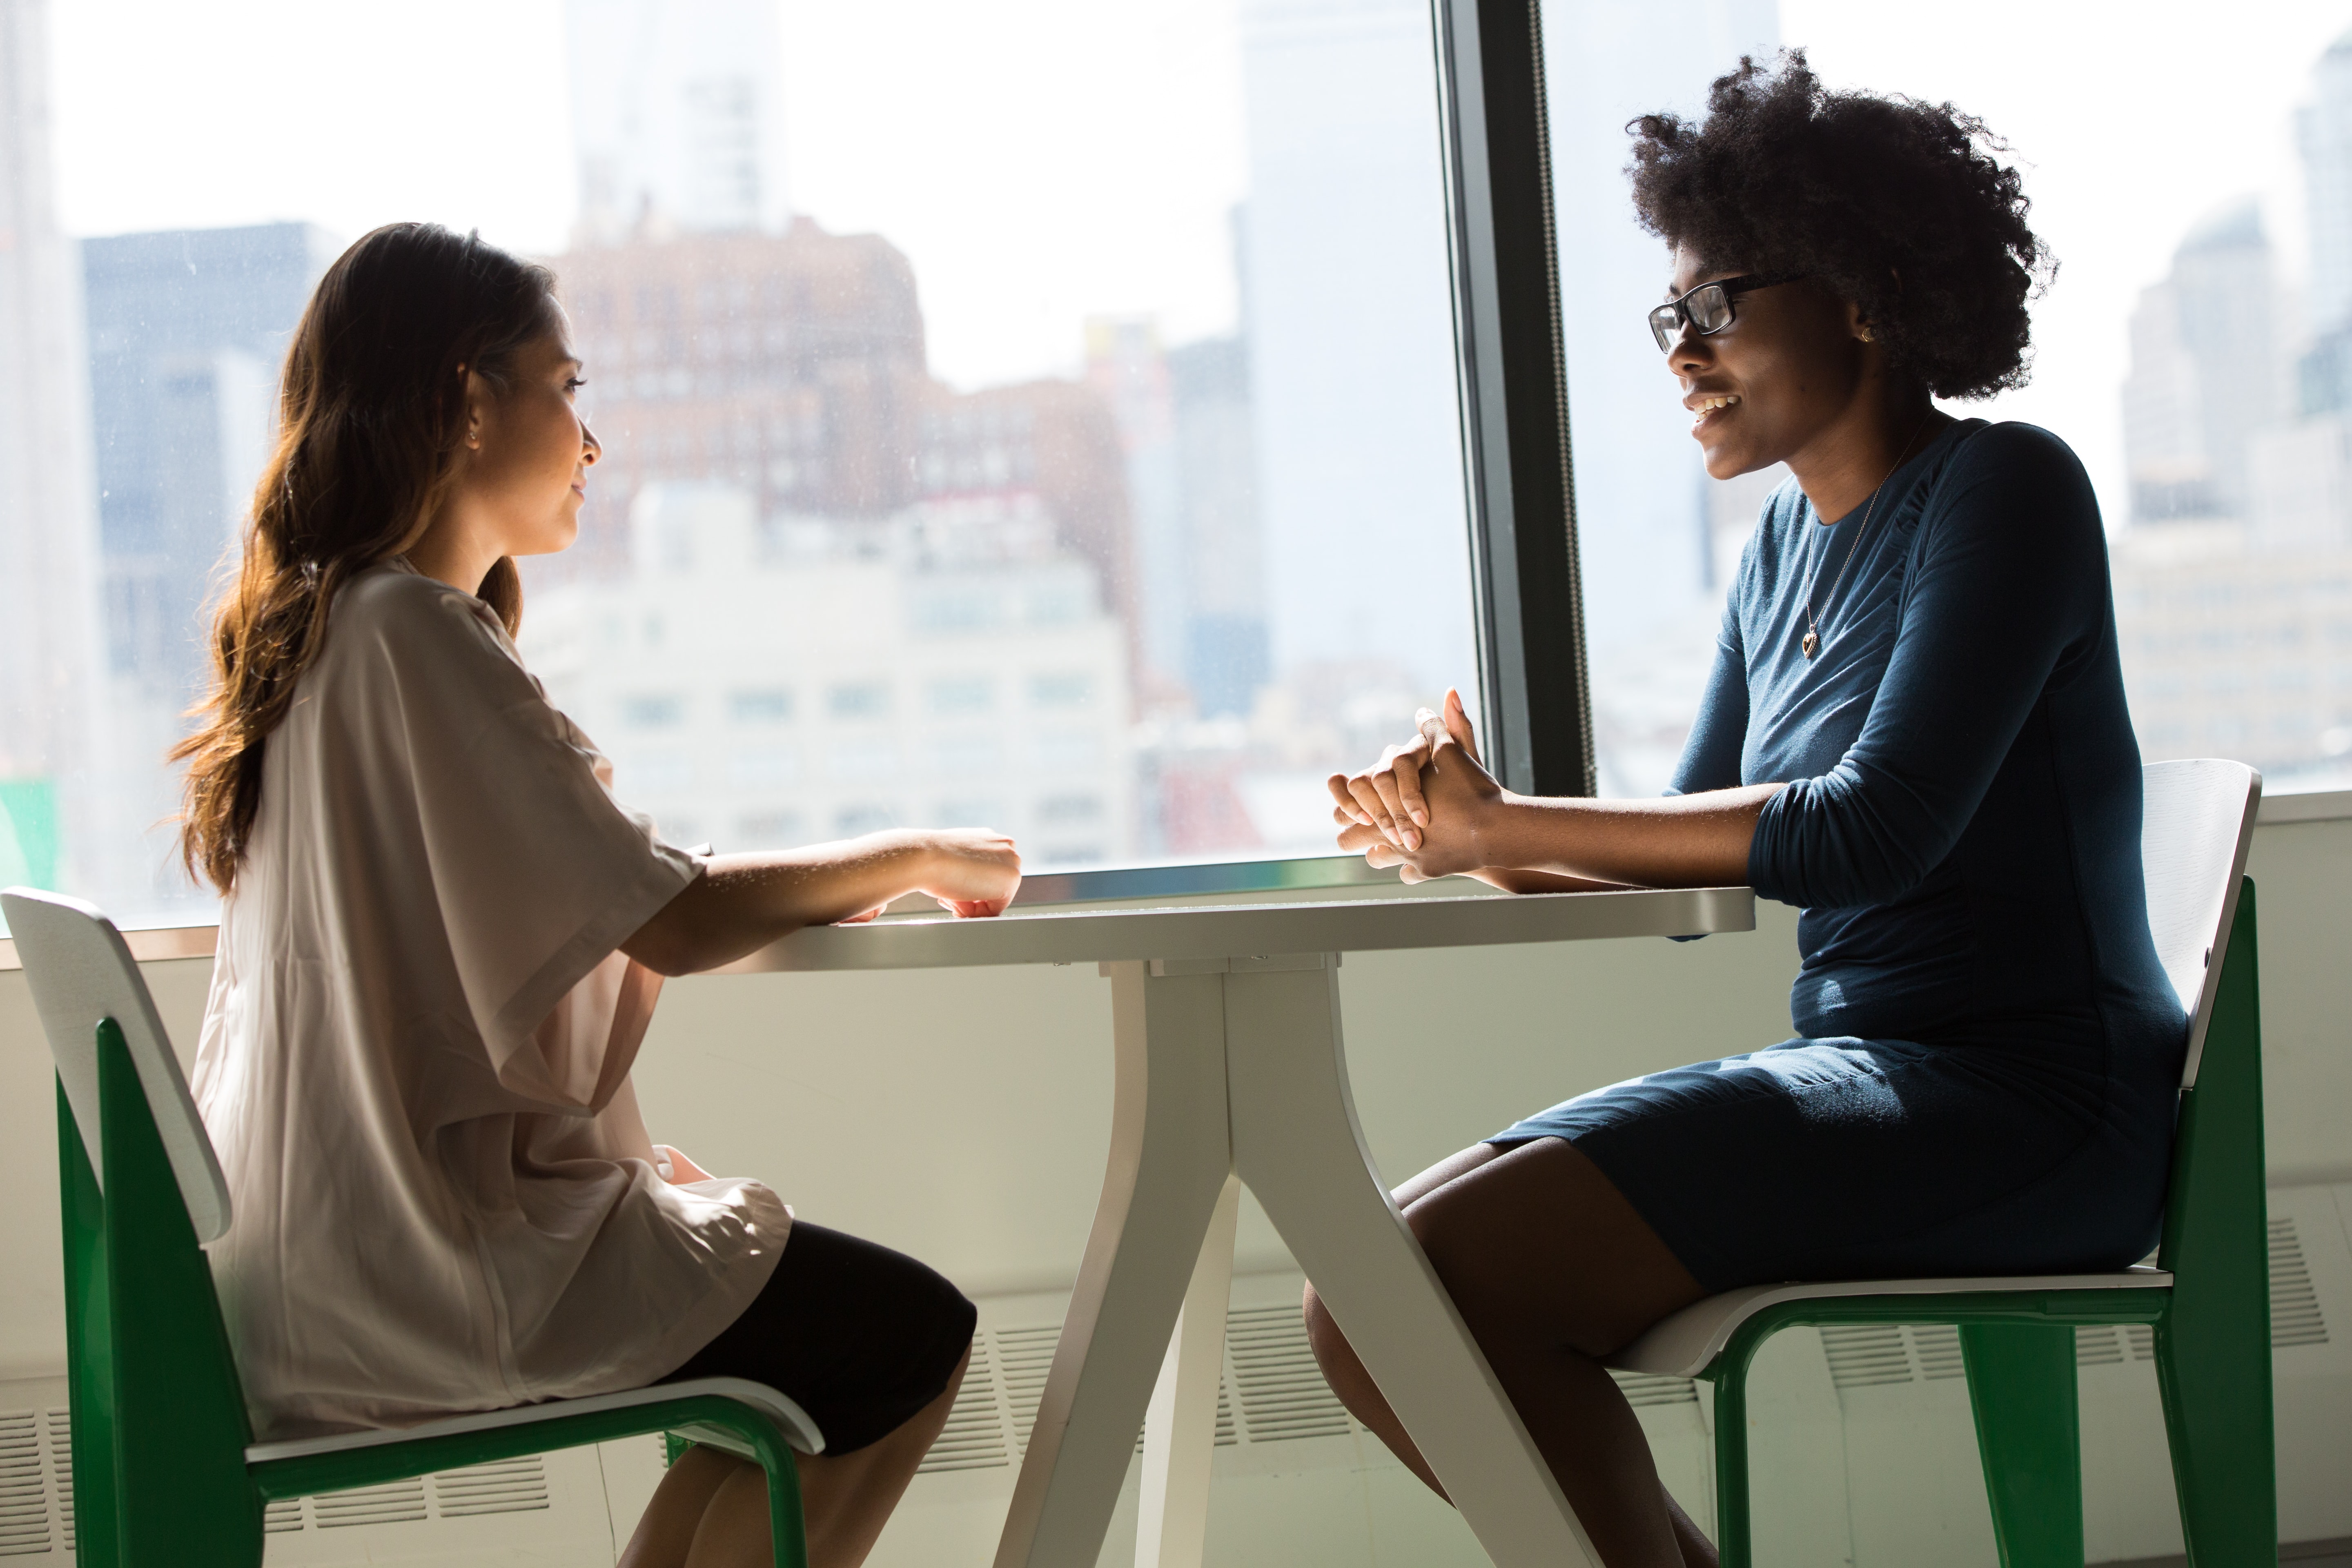 A black woman and a white woman sitting around a table chatting. Photo by Christina @ wocintechchat.com on Unsplash